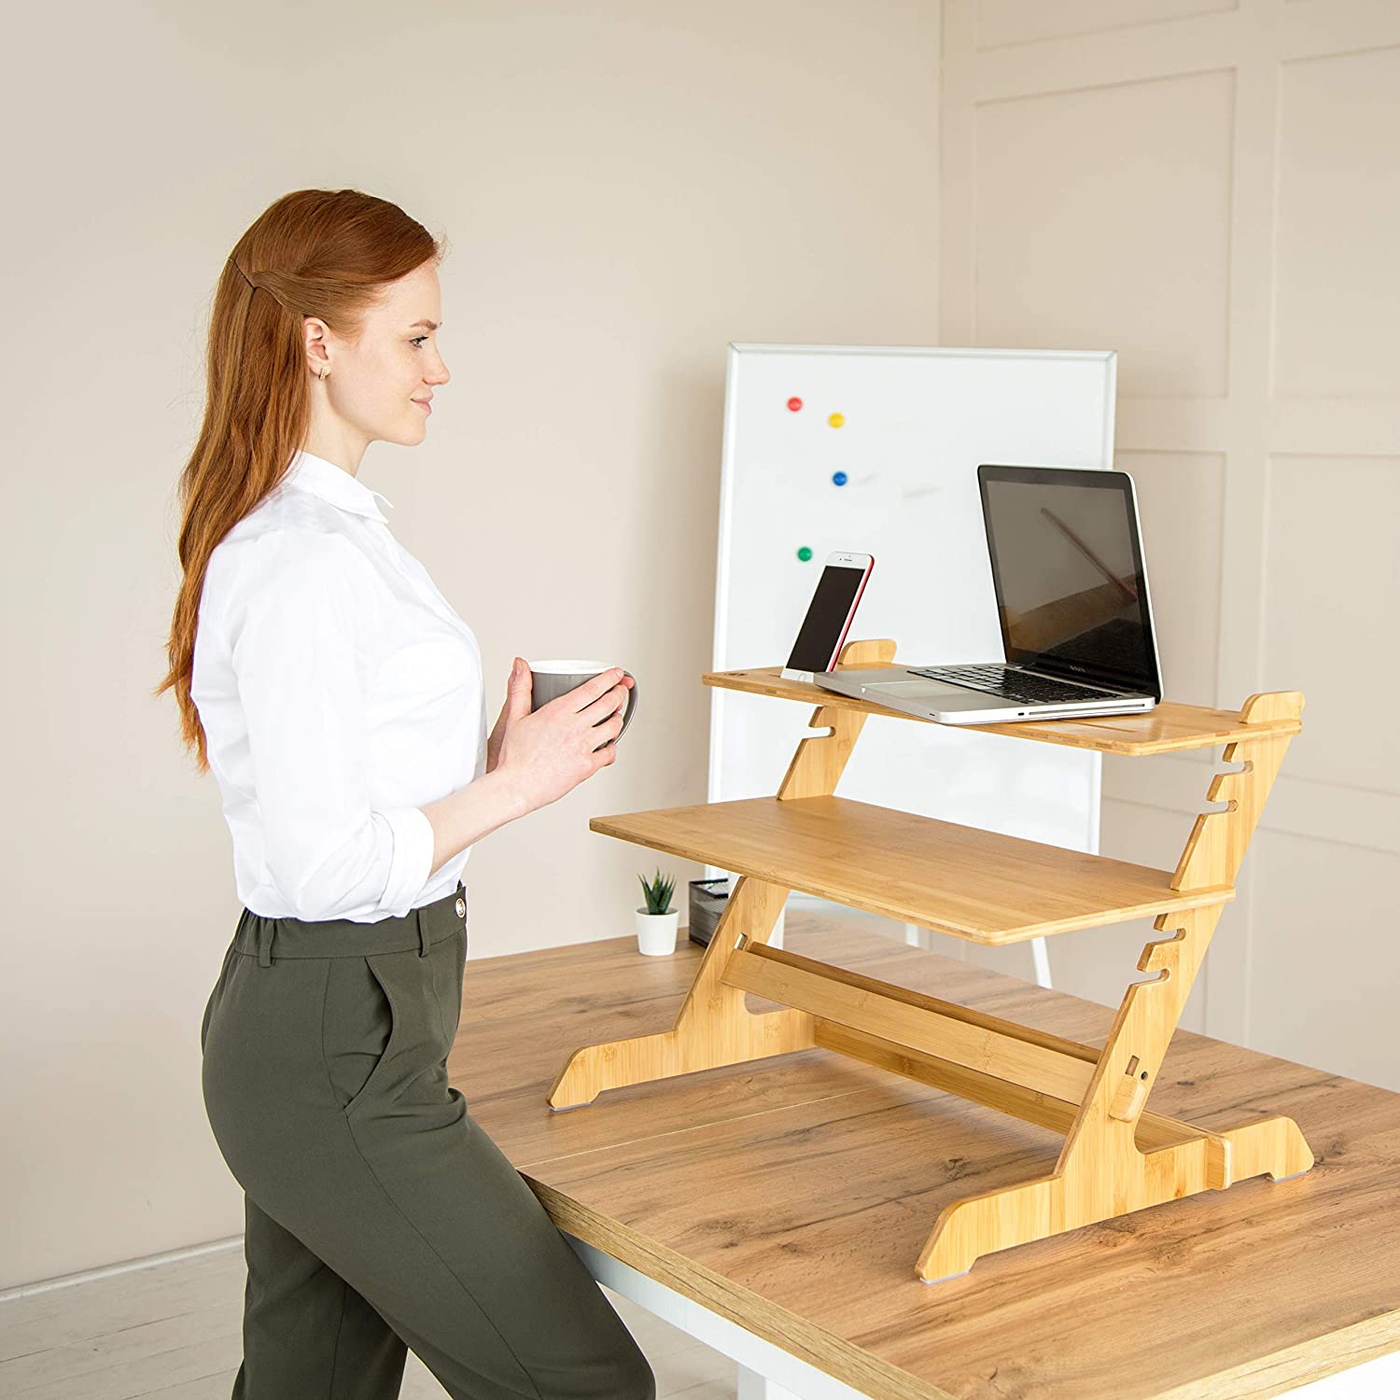 Crew & Axel Standing Desk Converter 100% Natural Bamboo Adjustable Sit Stand Riser Workstation for Desktop or Laptop, Dual Monitor Stand - Home or Office Use (19” High 26” Wide) - Includes Phone Stand